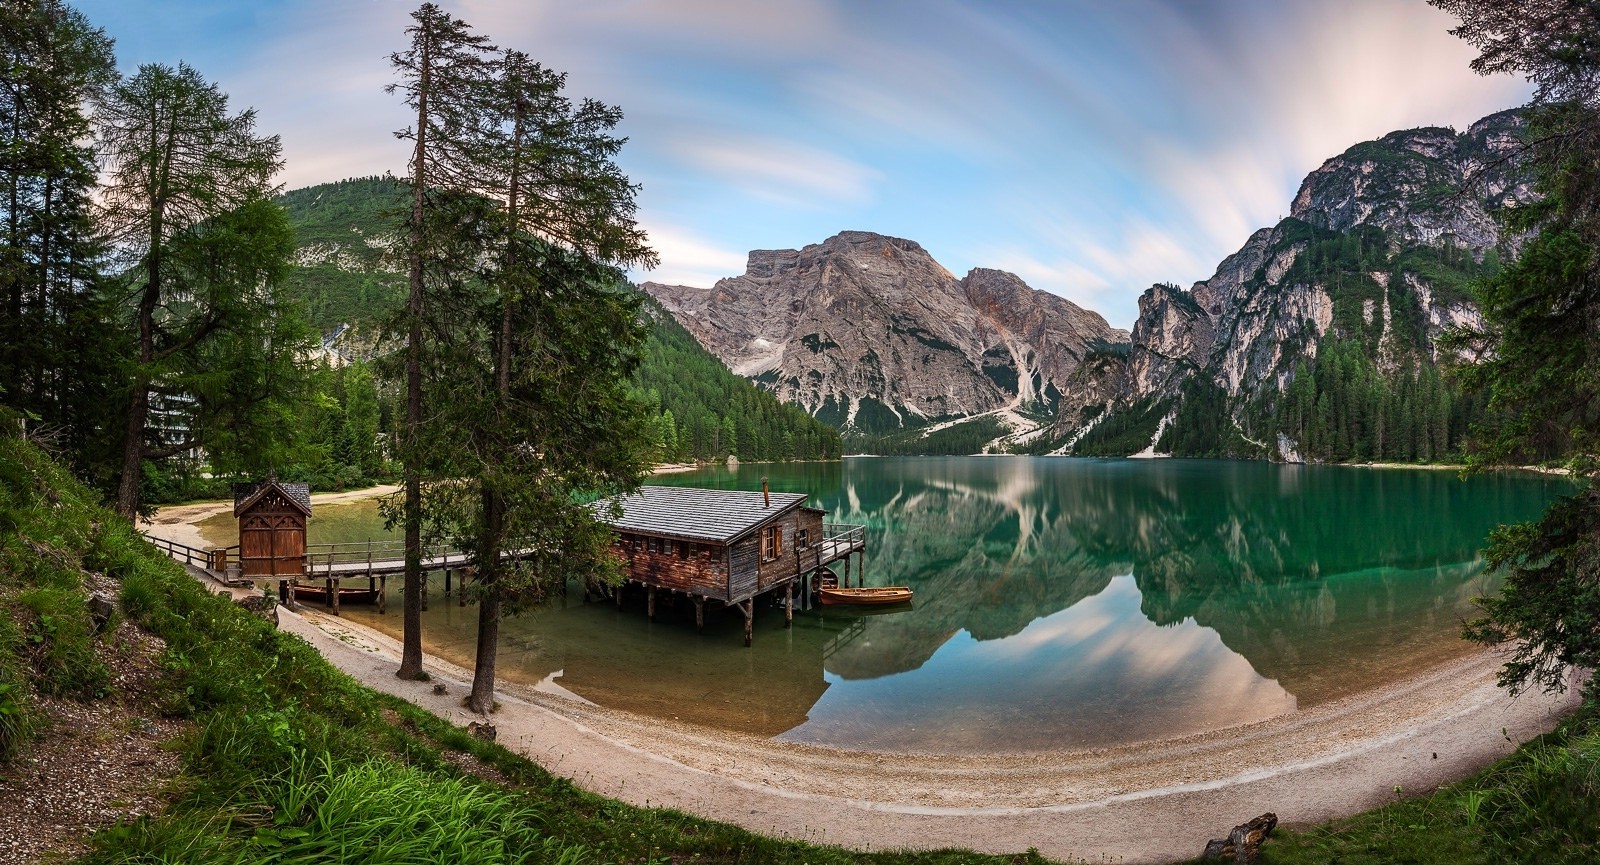 photography, Landscape, Nature, Panoramas, Lake, Reflections, Boathouses, Mountains, Summer, Forest, Beach, Trees, Alps, Italy, Morning, Sunlight Wallpaper